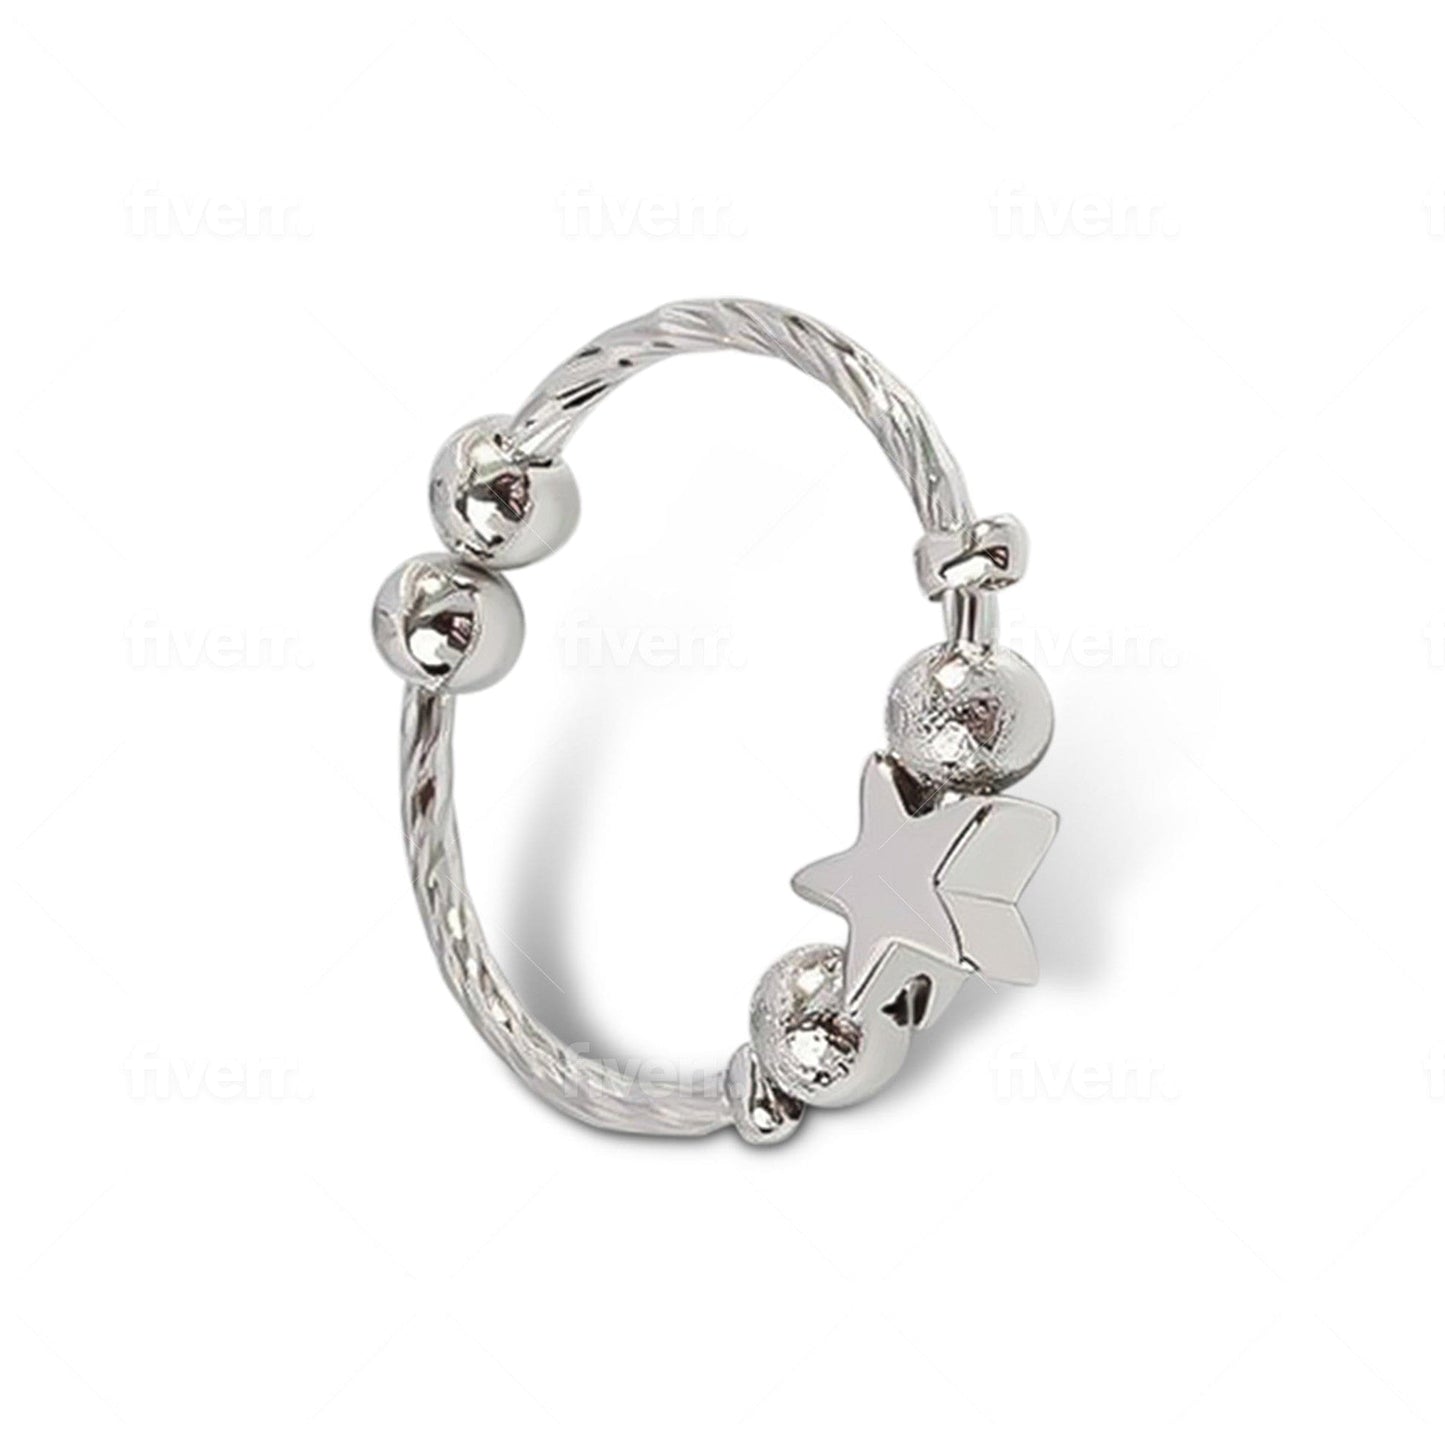 The Star Shine Collection - Sterling Silver Fidget Spinner Ring